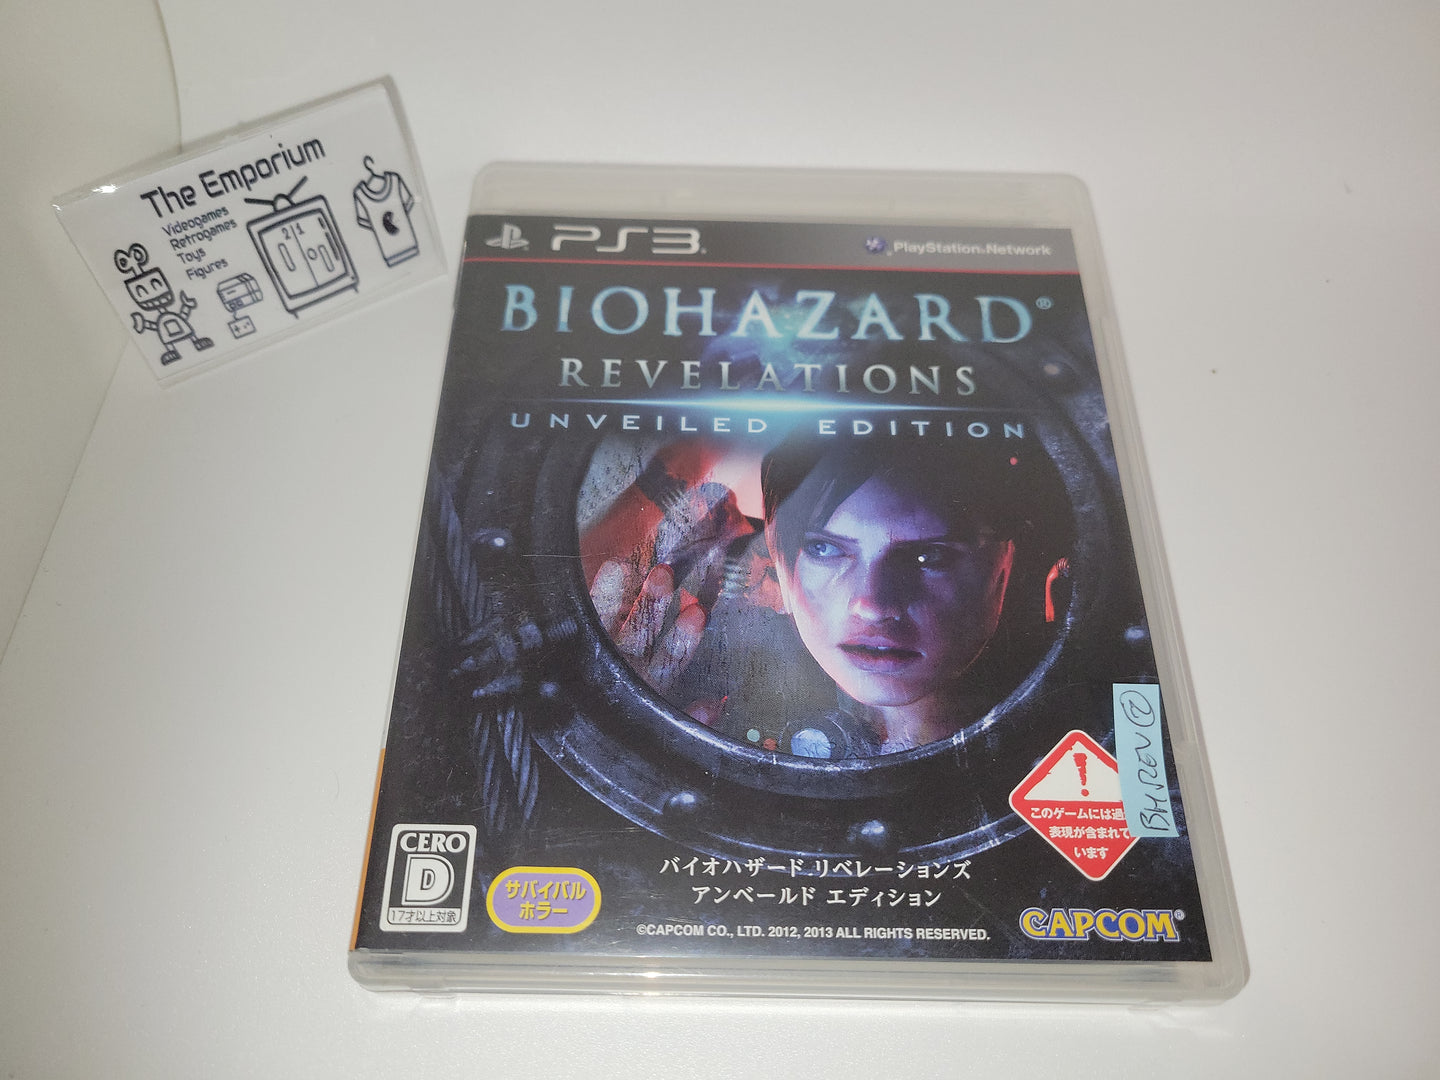 BioHazard Revelations Unveiled Edition - Sony PS3 Playstation 3